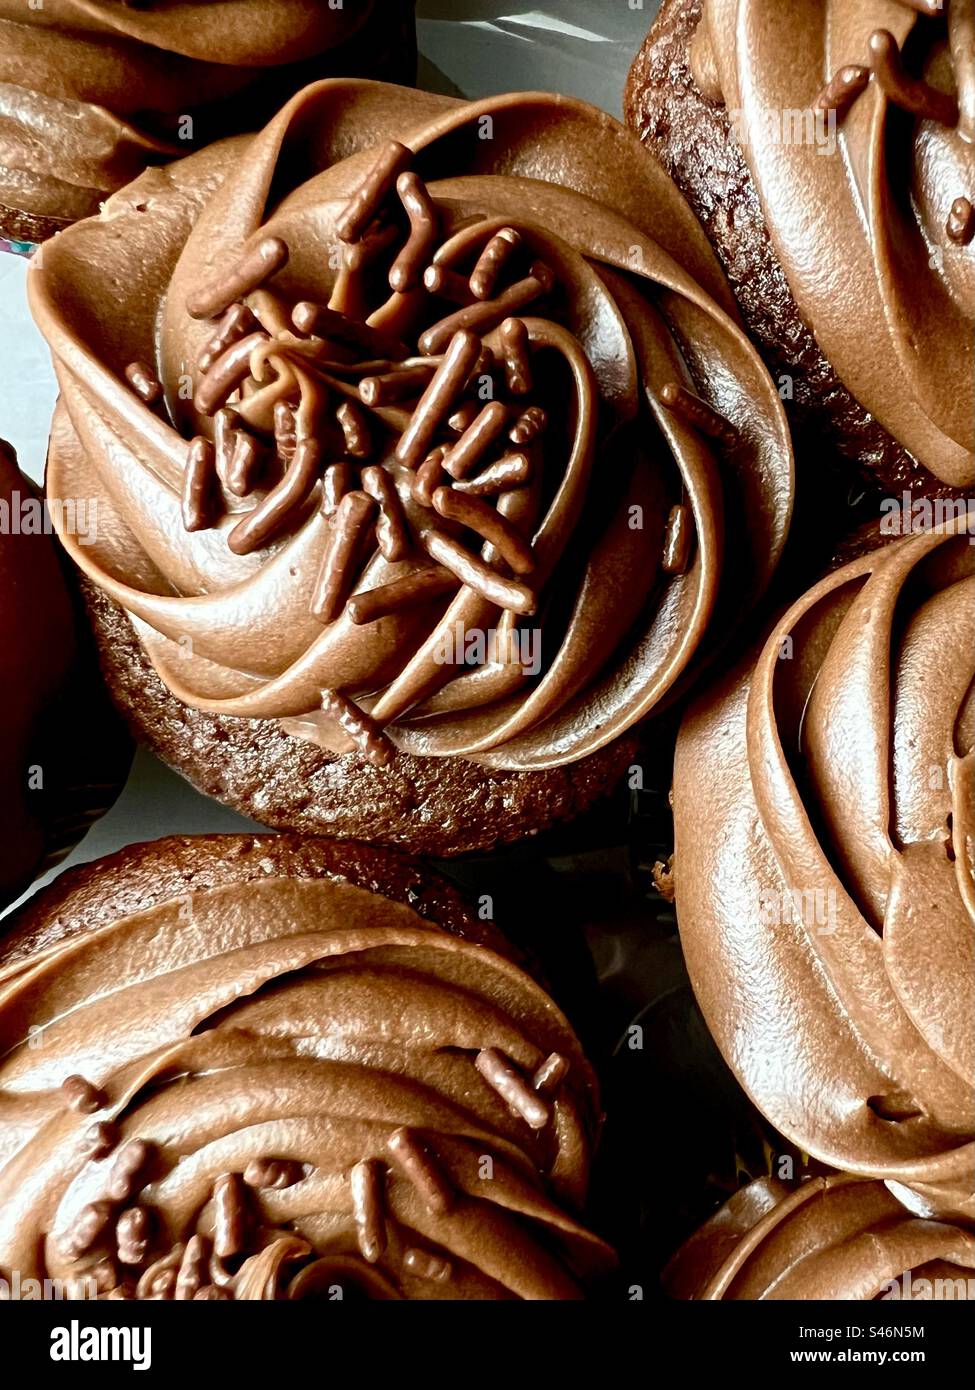 Full frame of chocolate cupcakes Stock Photo